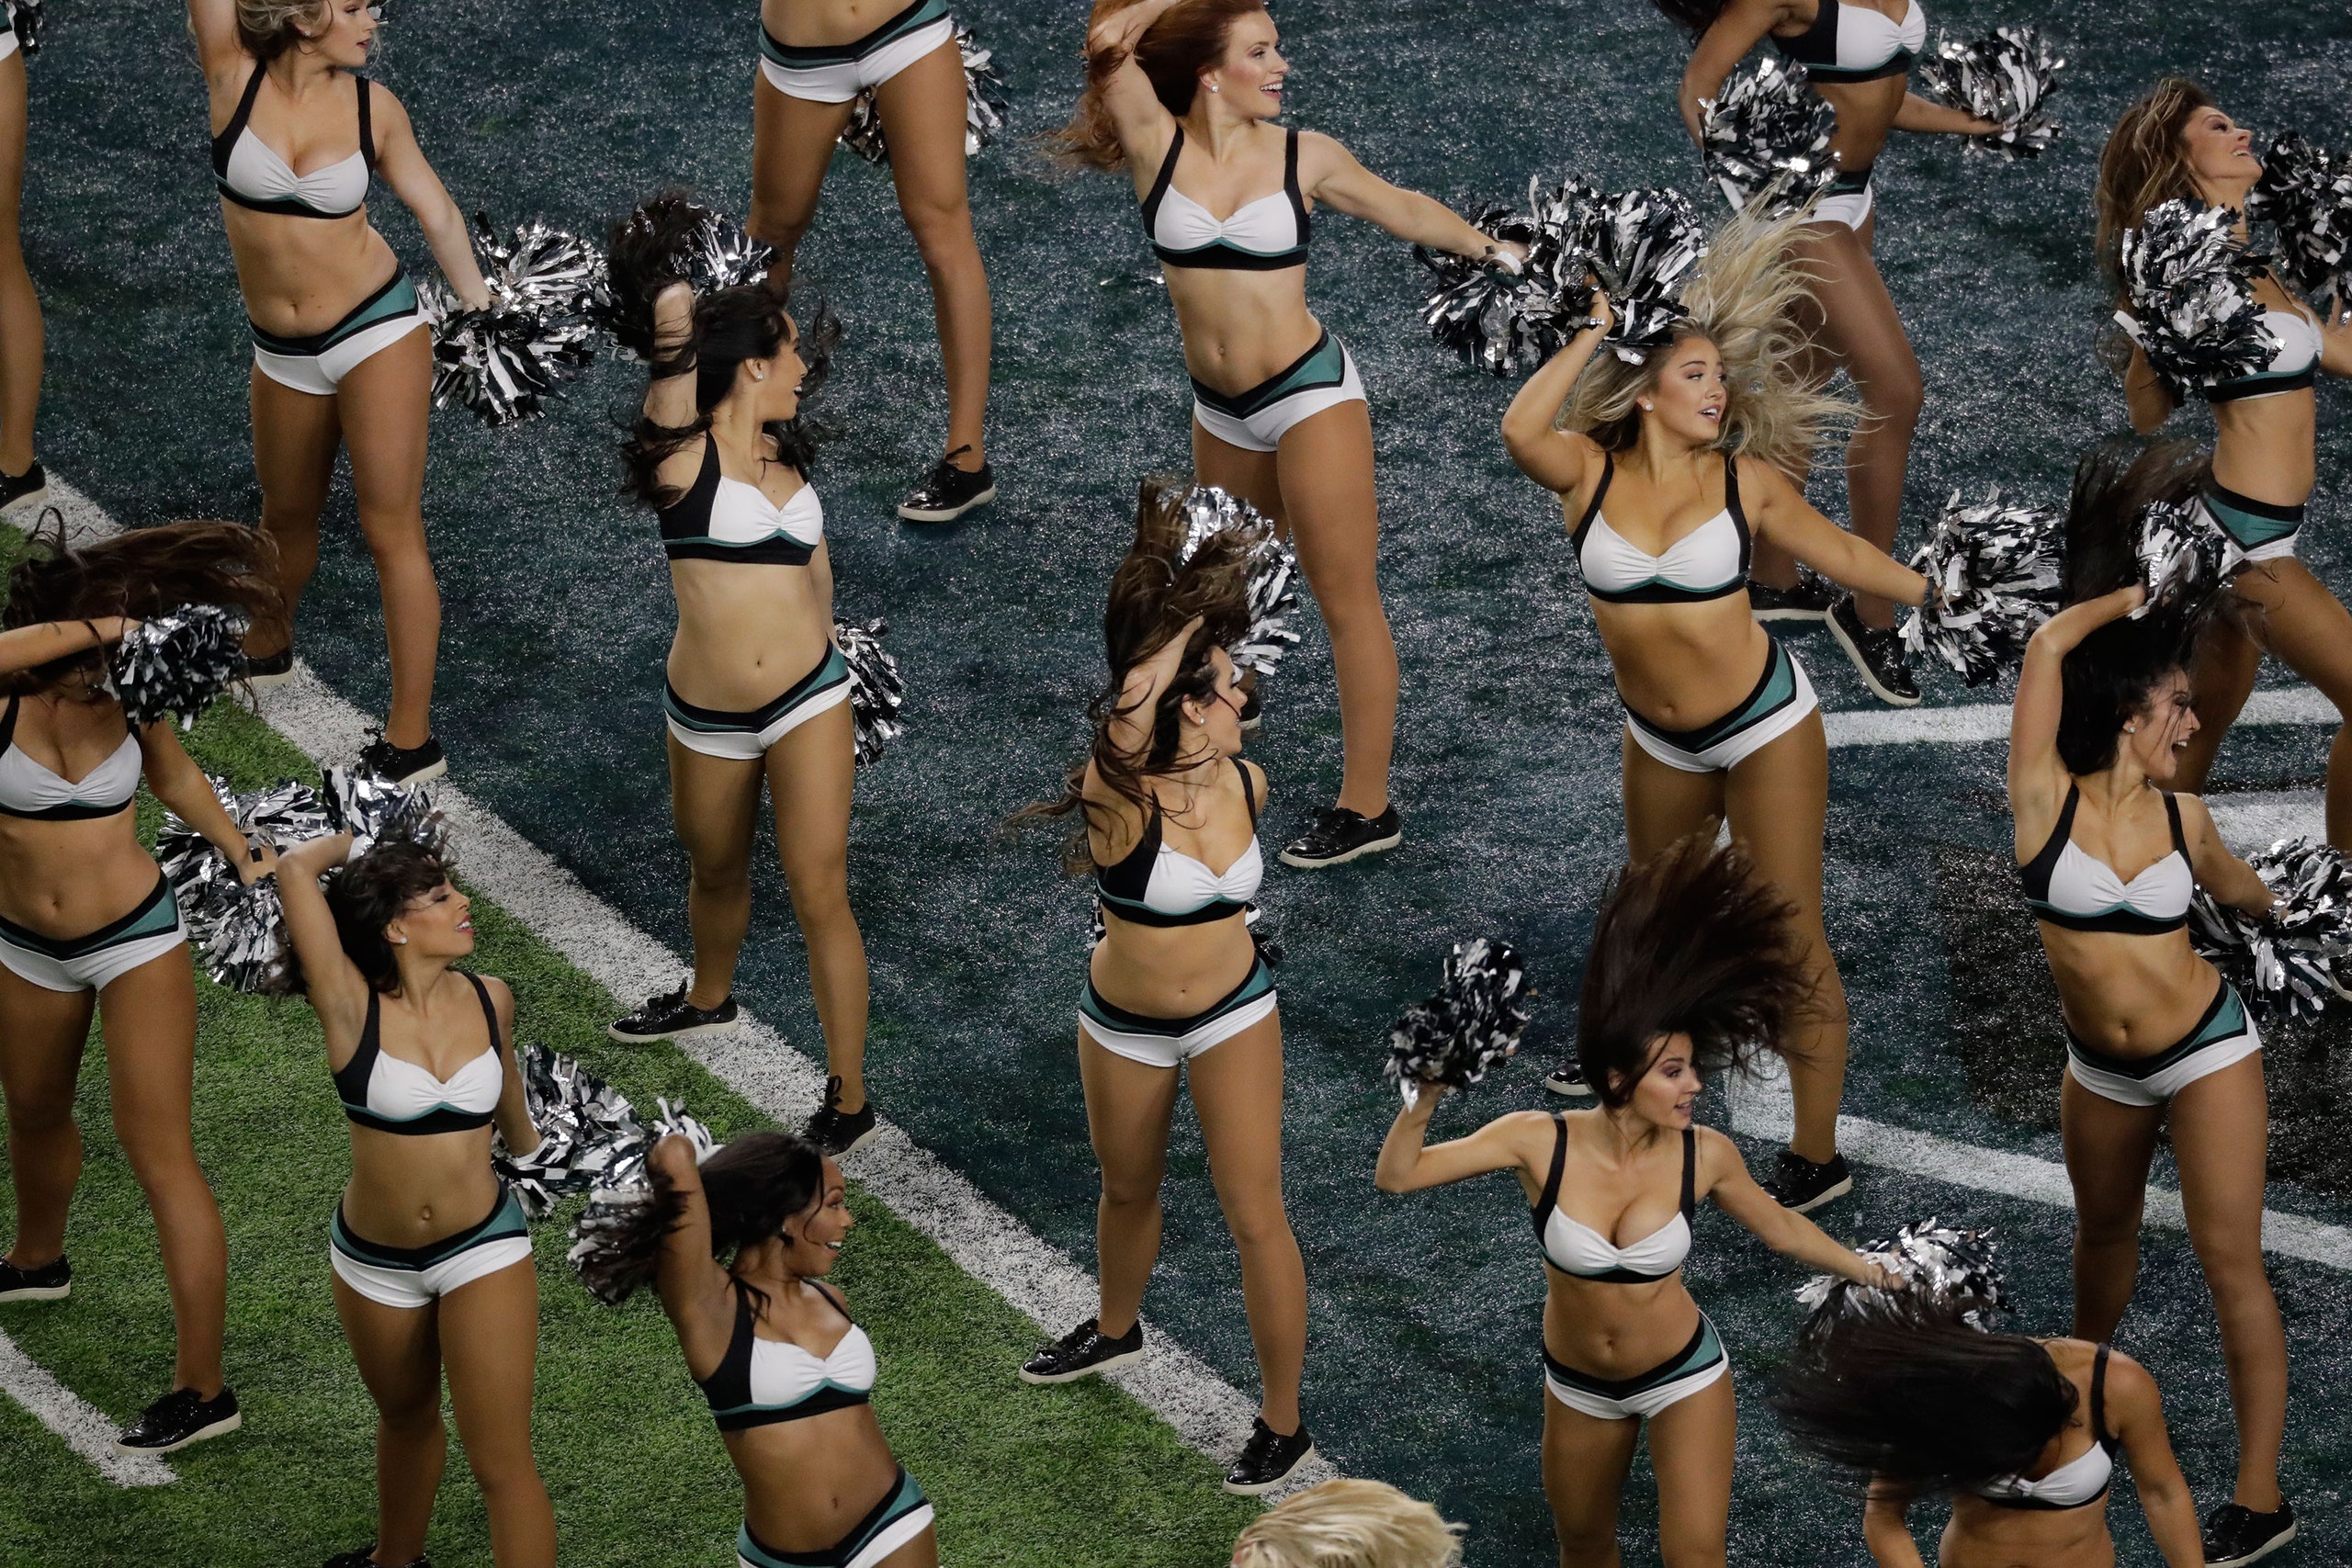 christopher mccomb recommends cheerleaders caught without panties pic